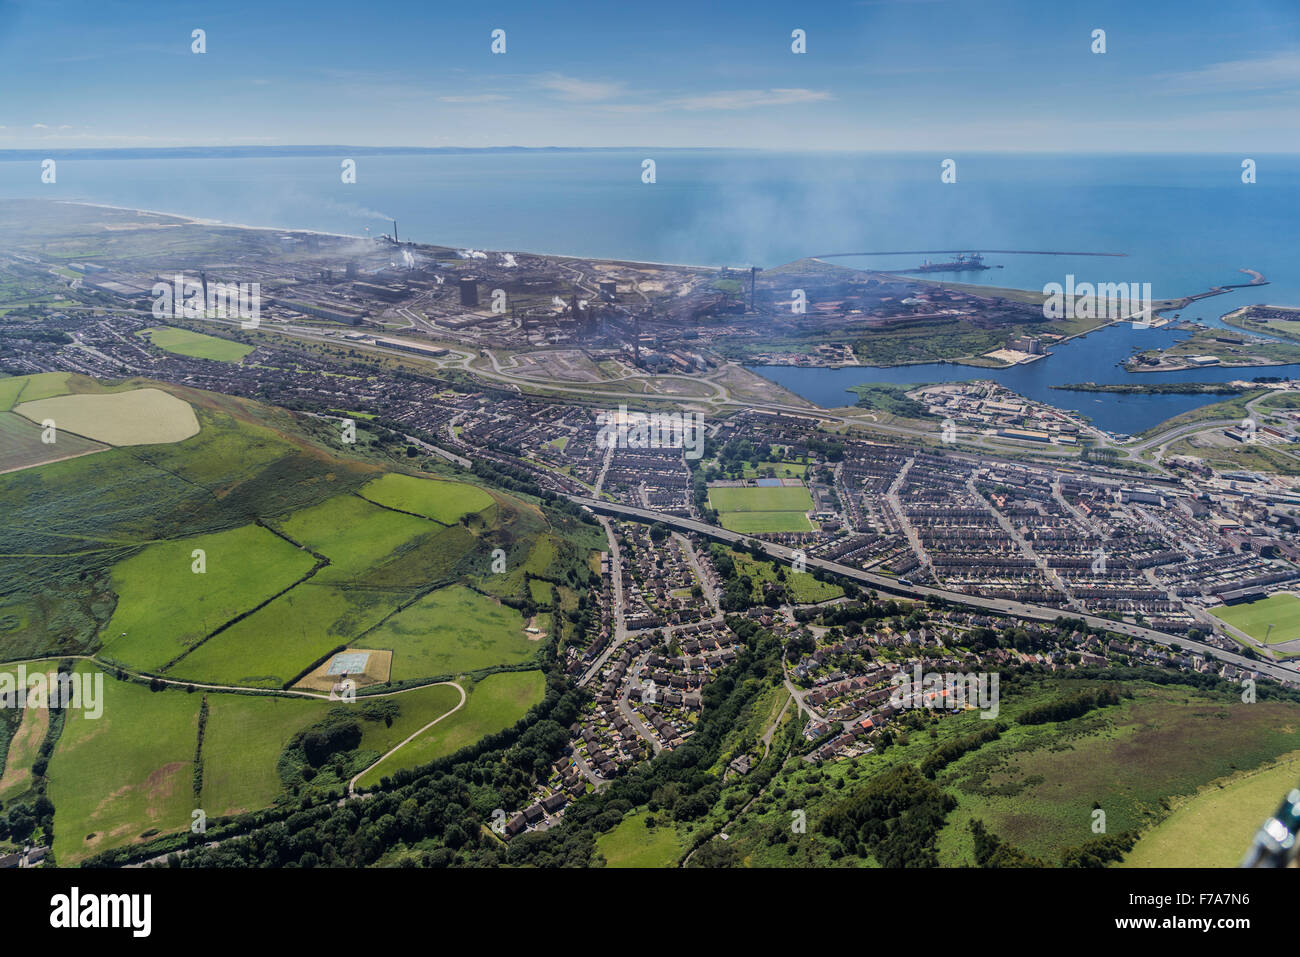 Aerial views of Port Talbot Steelworks and the South Wales Coast, Wales, UK 1st August 2015 PHILLIP ROBERTS Stock Photo